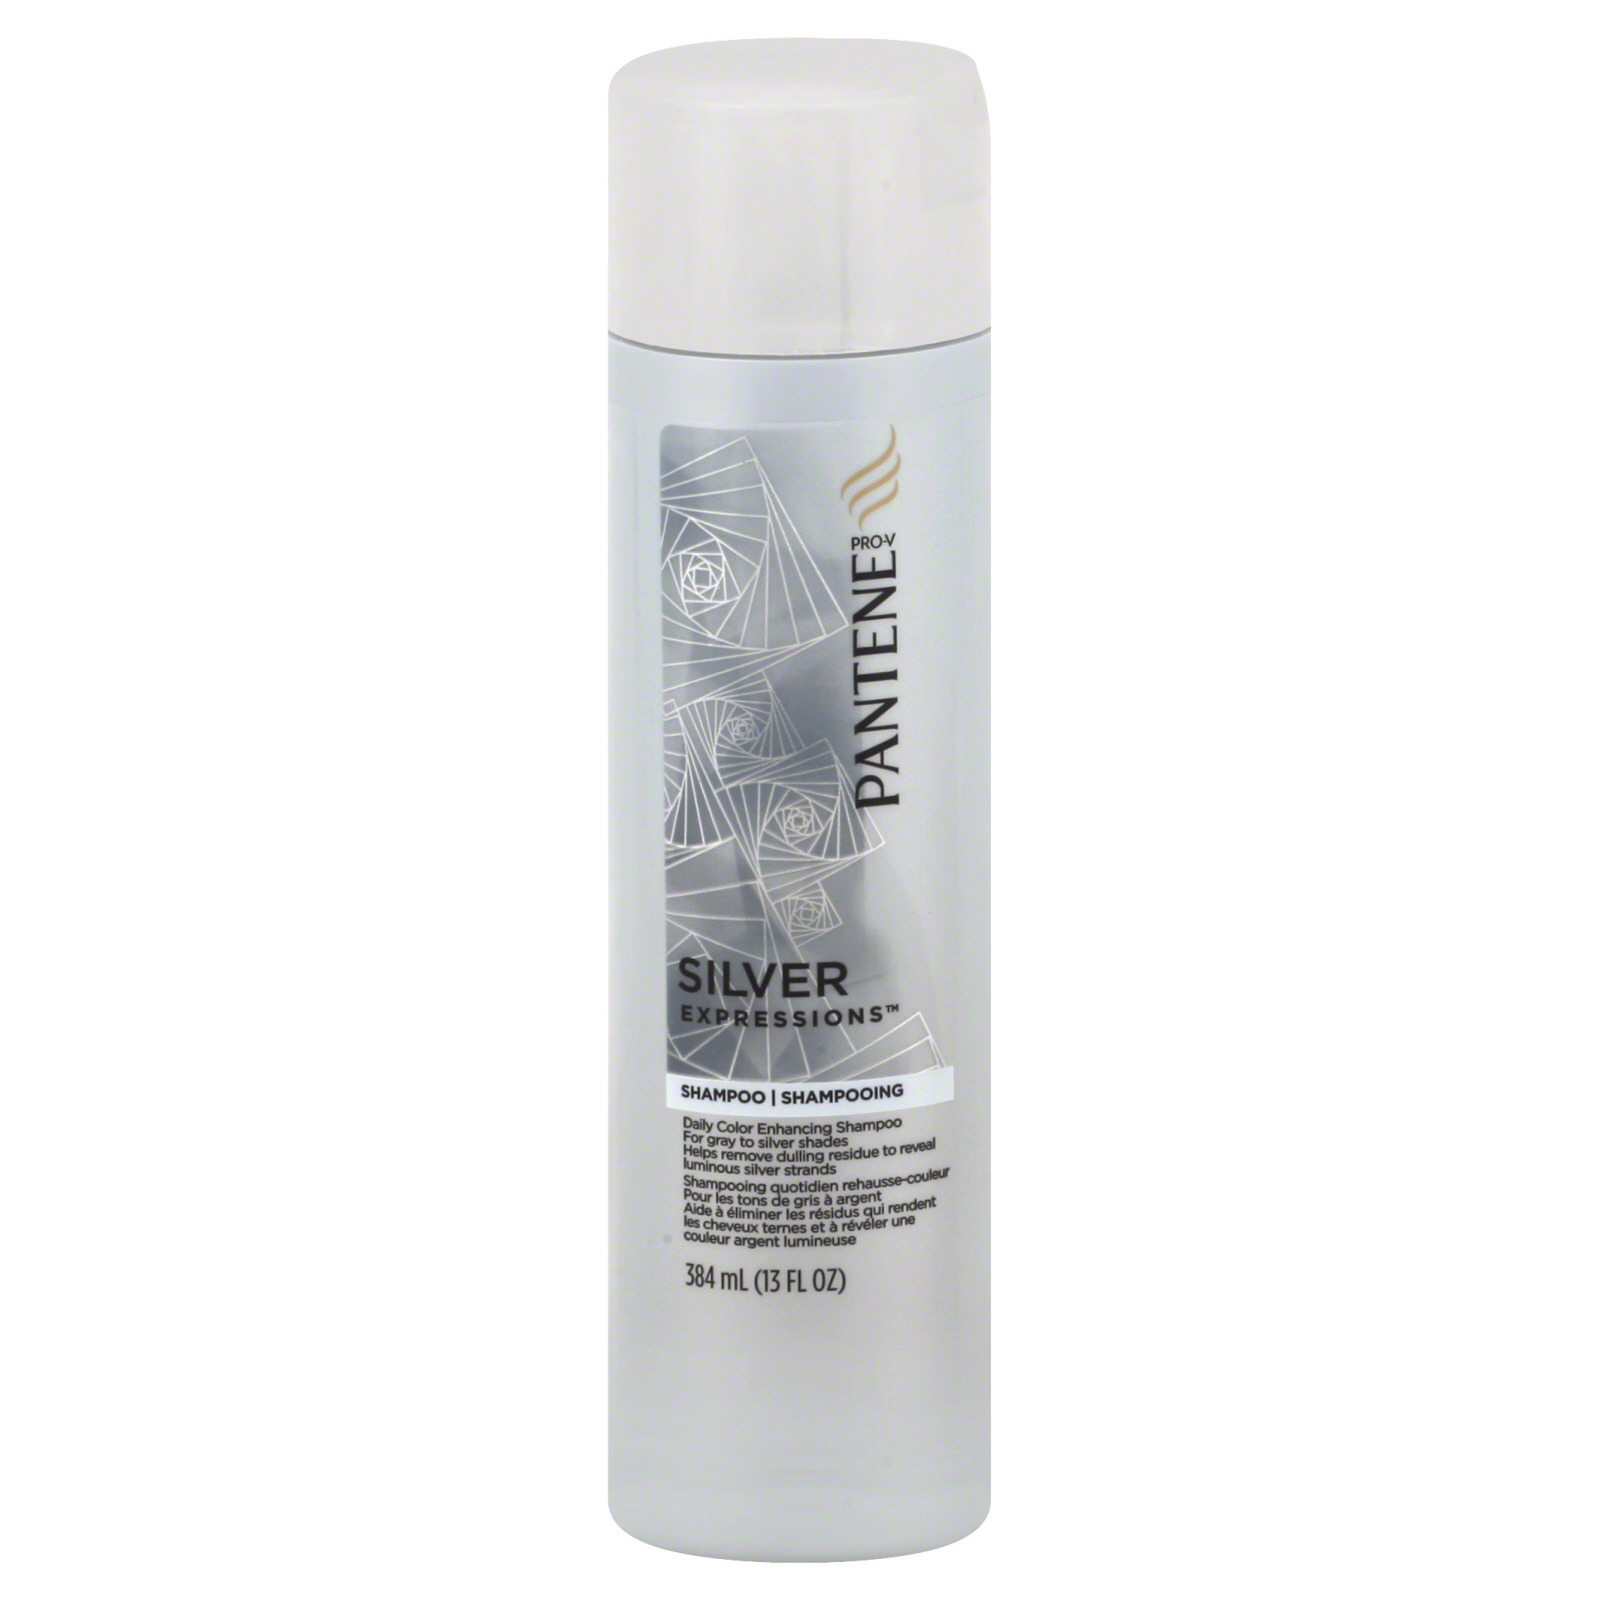 Pantene Pro-V Silver Expressions Shampoo, Daily Color Enhancing, For Gray to Silver Shades, 13 fl oz (384 ml)